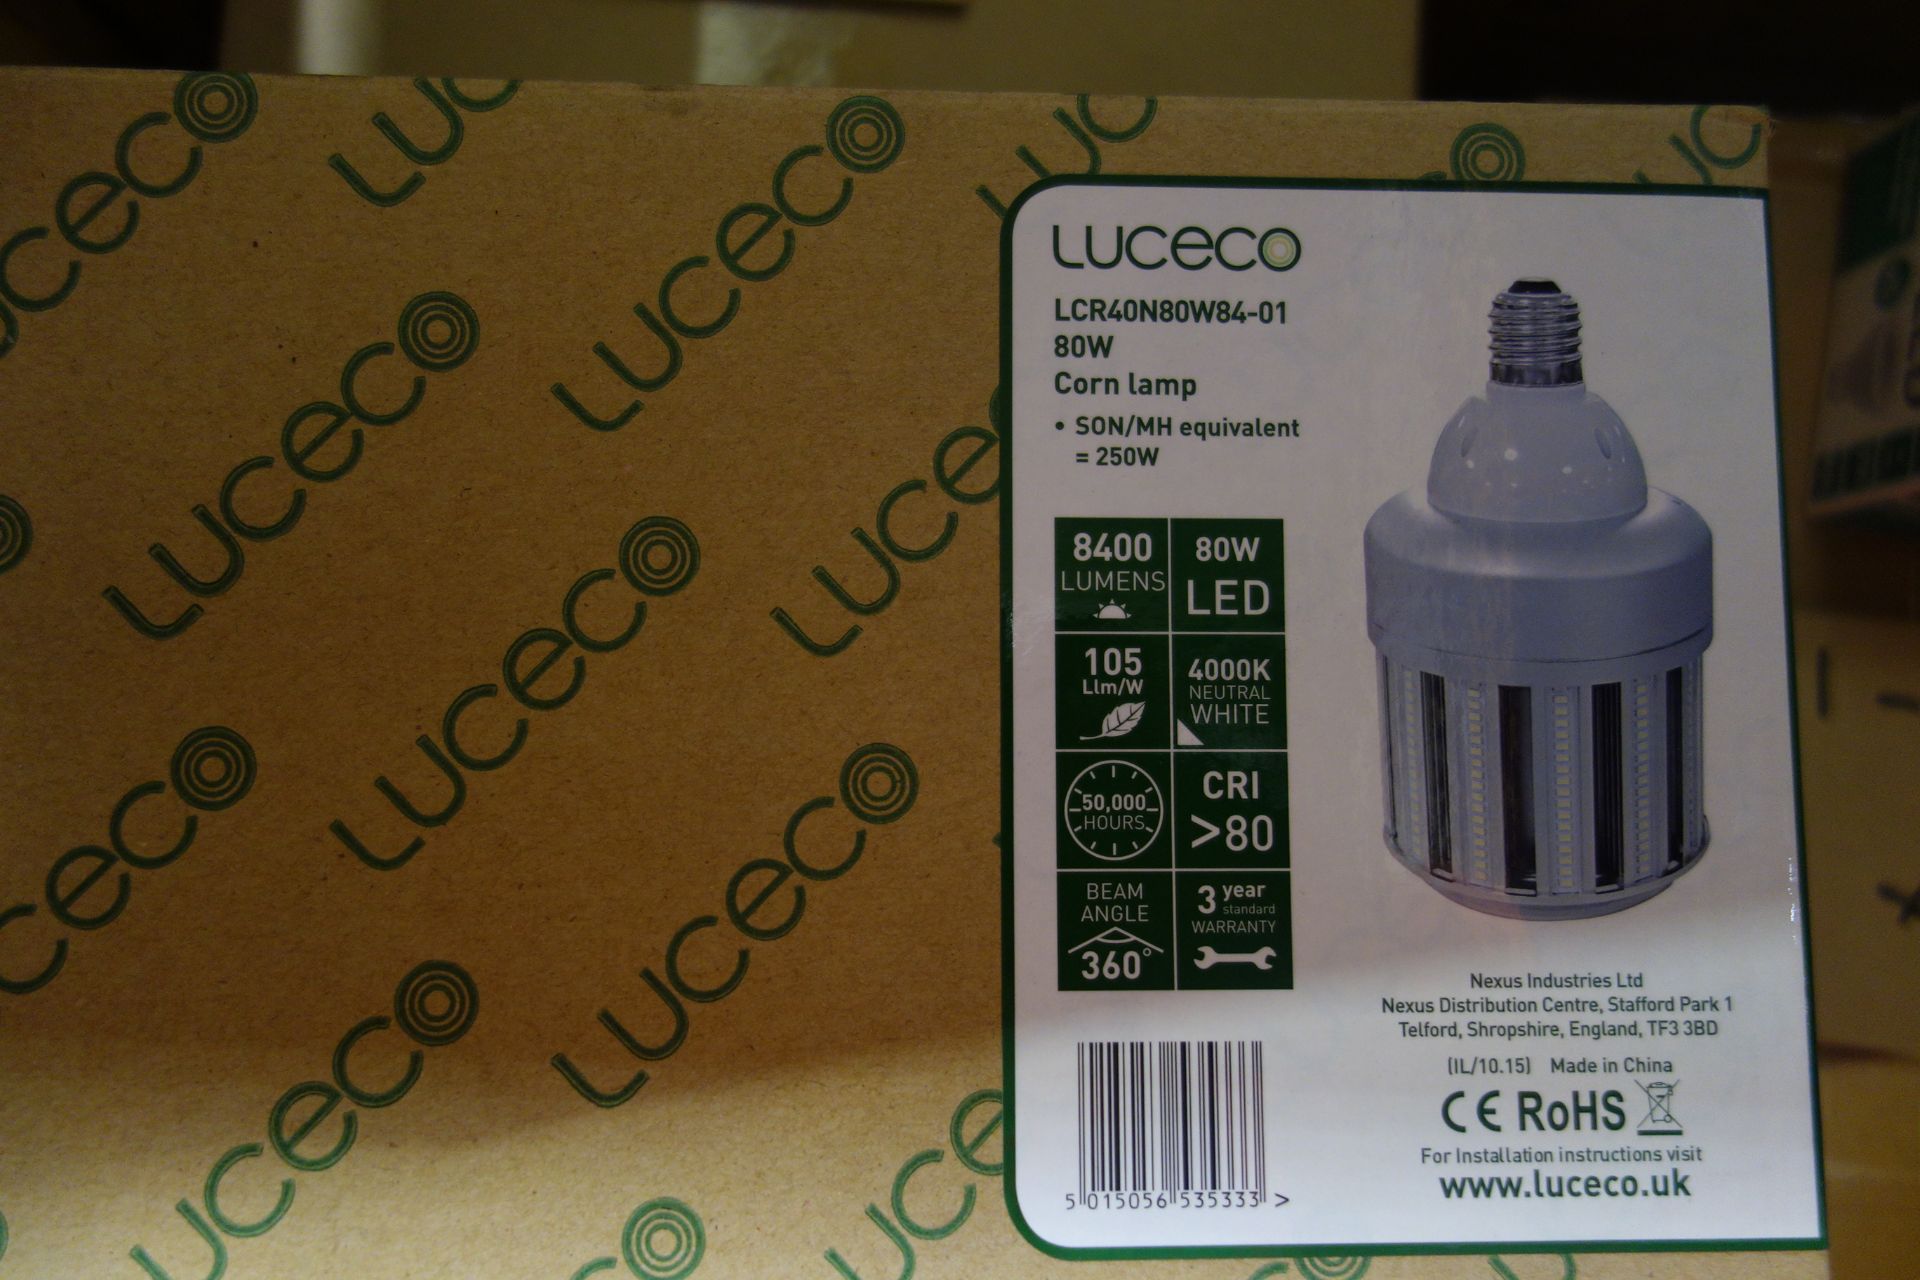 10 X Luceco LCR40N80W84-01 LED Corn Lamp 80W Natural Light 4000K E40 Fitting